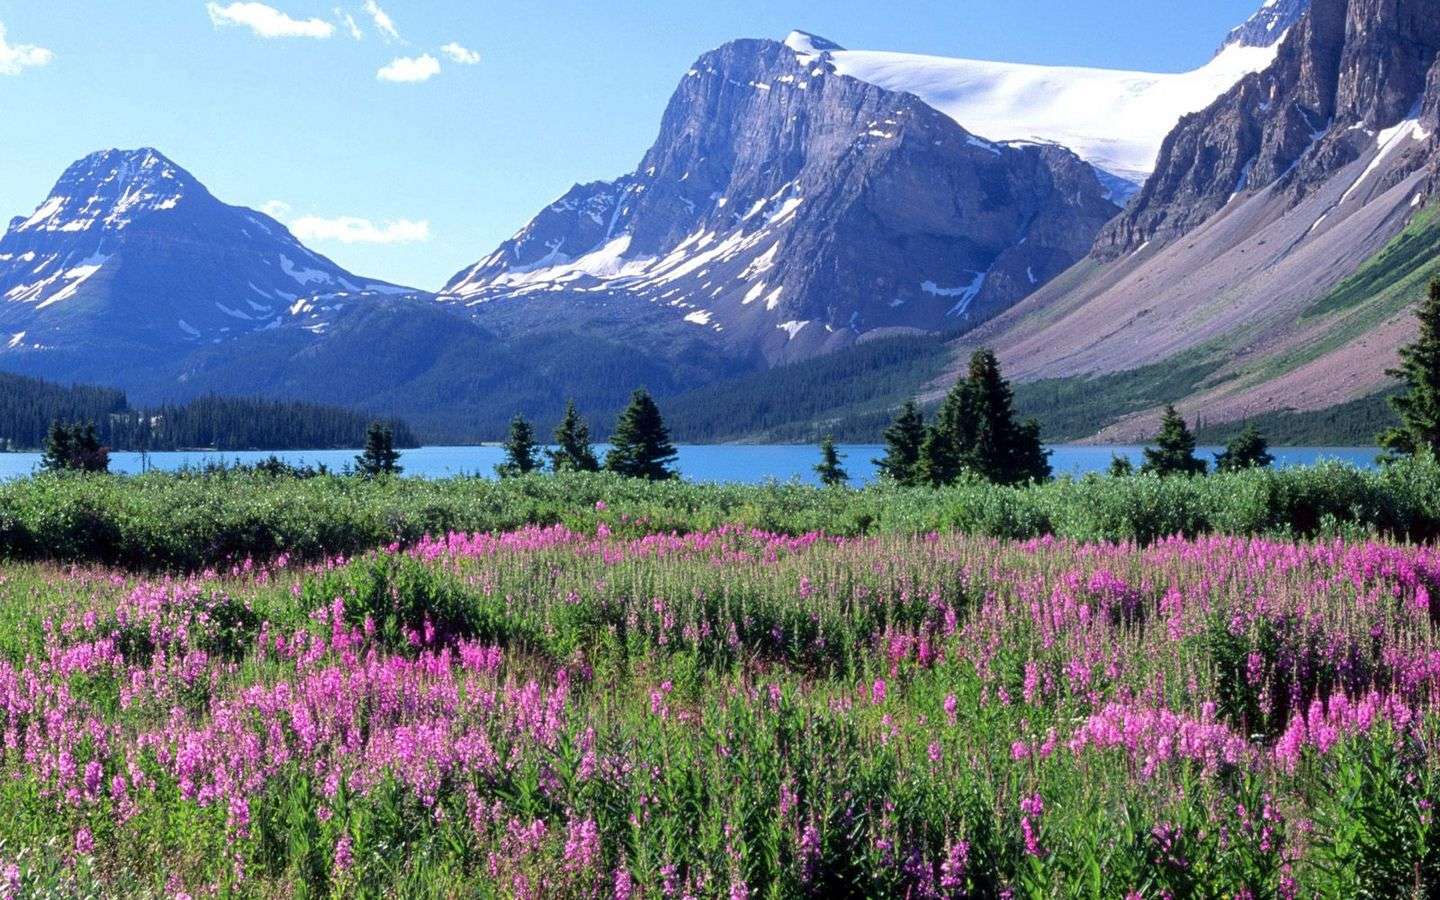 Mountains_trees_flowers_lake_canada_glade_8245_144 puzzle online